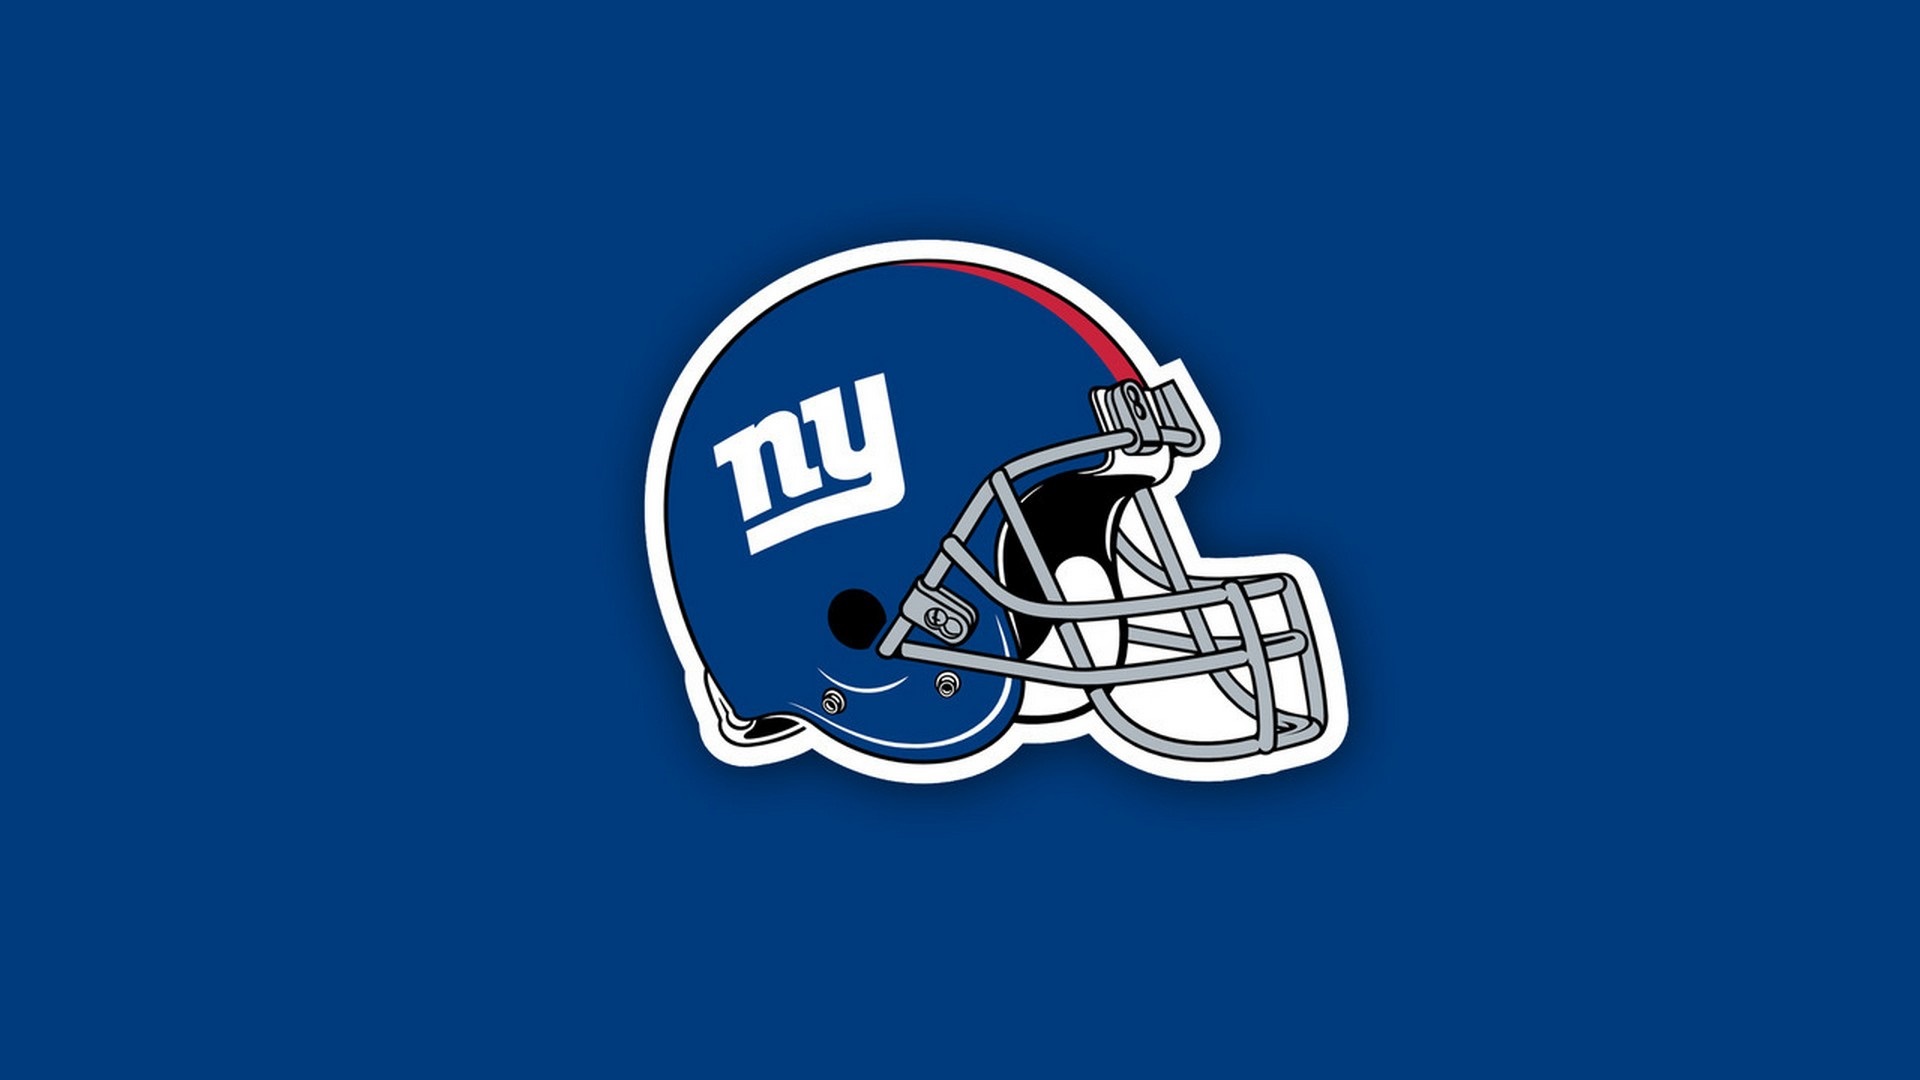 New York Giants NFL For Mac with high-resolution 1920x1080 pixel. You can use this wallpaper for your Mac or Windows Desktop Background, iPhone, Android or Tablet and another Smartphone device